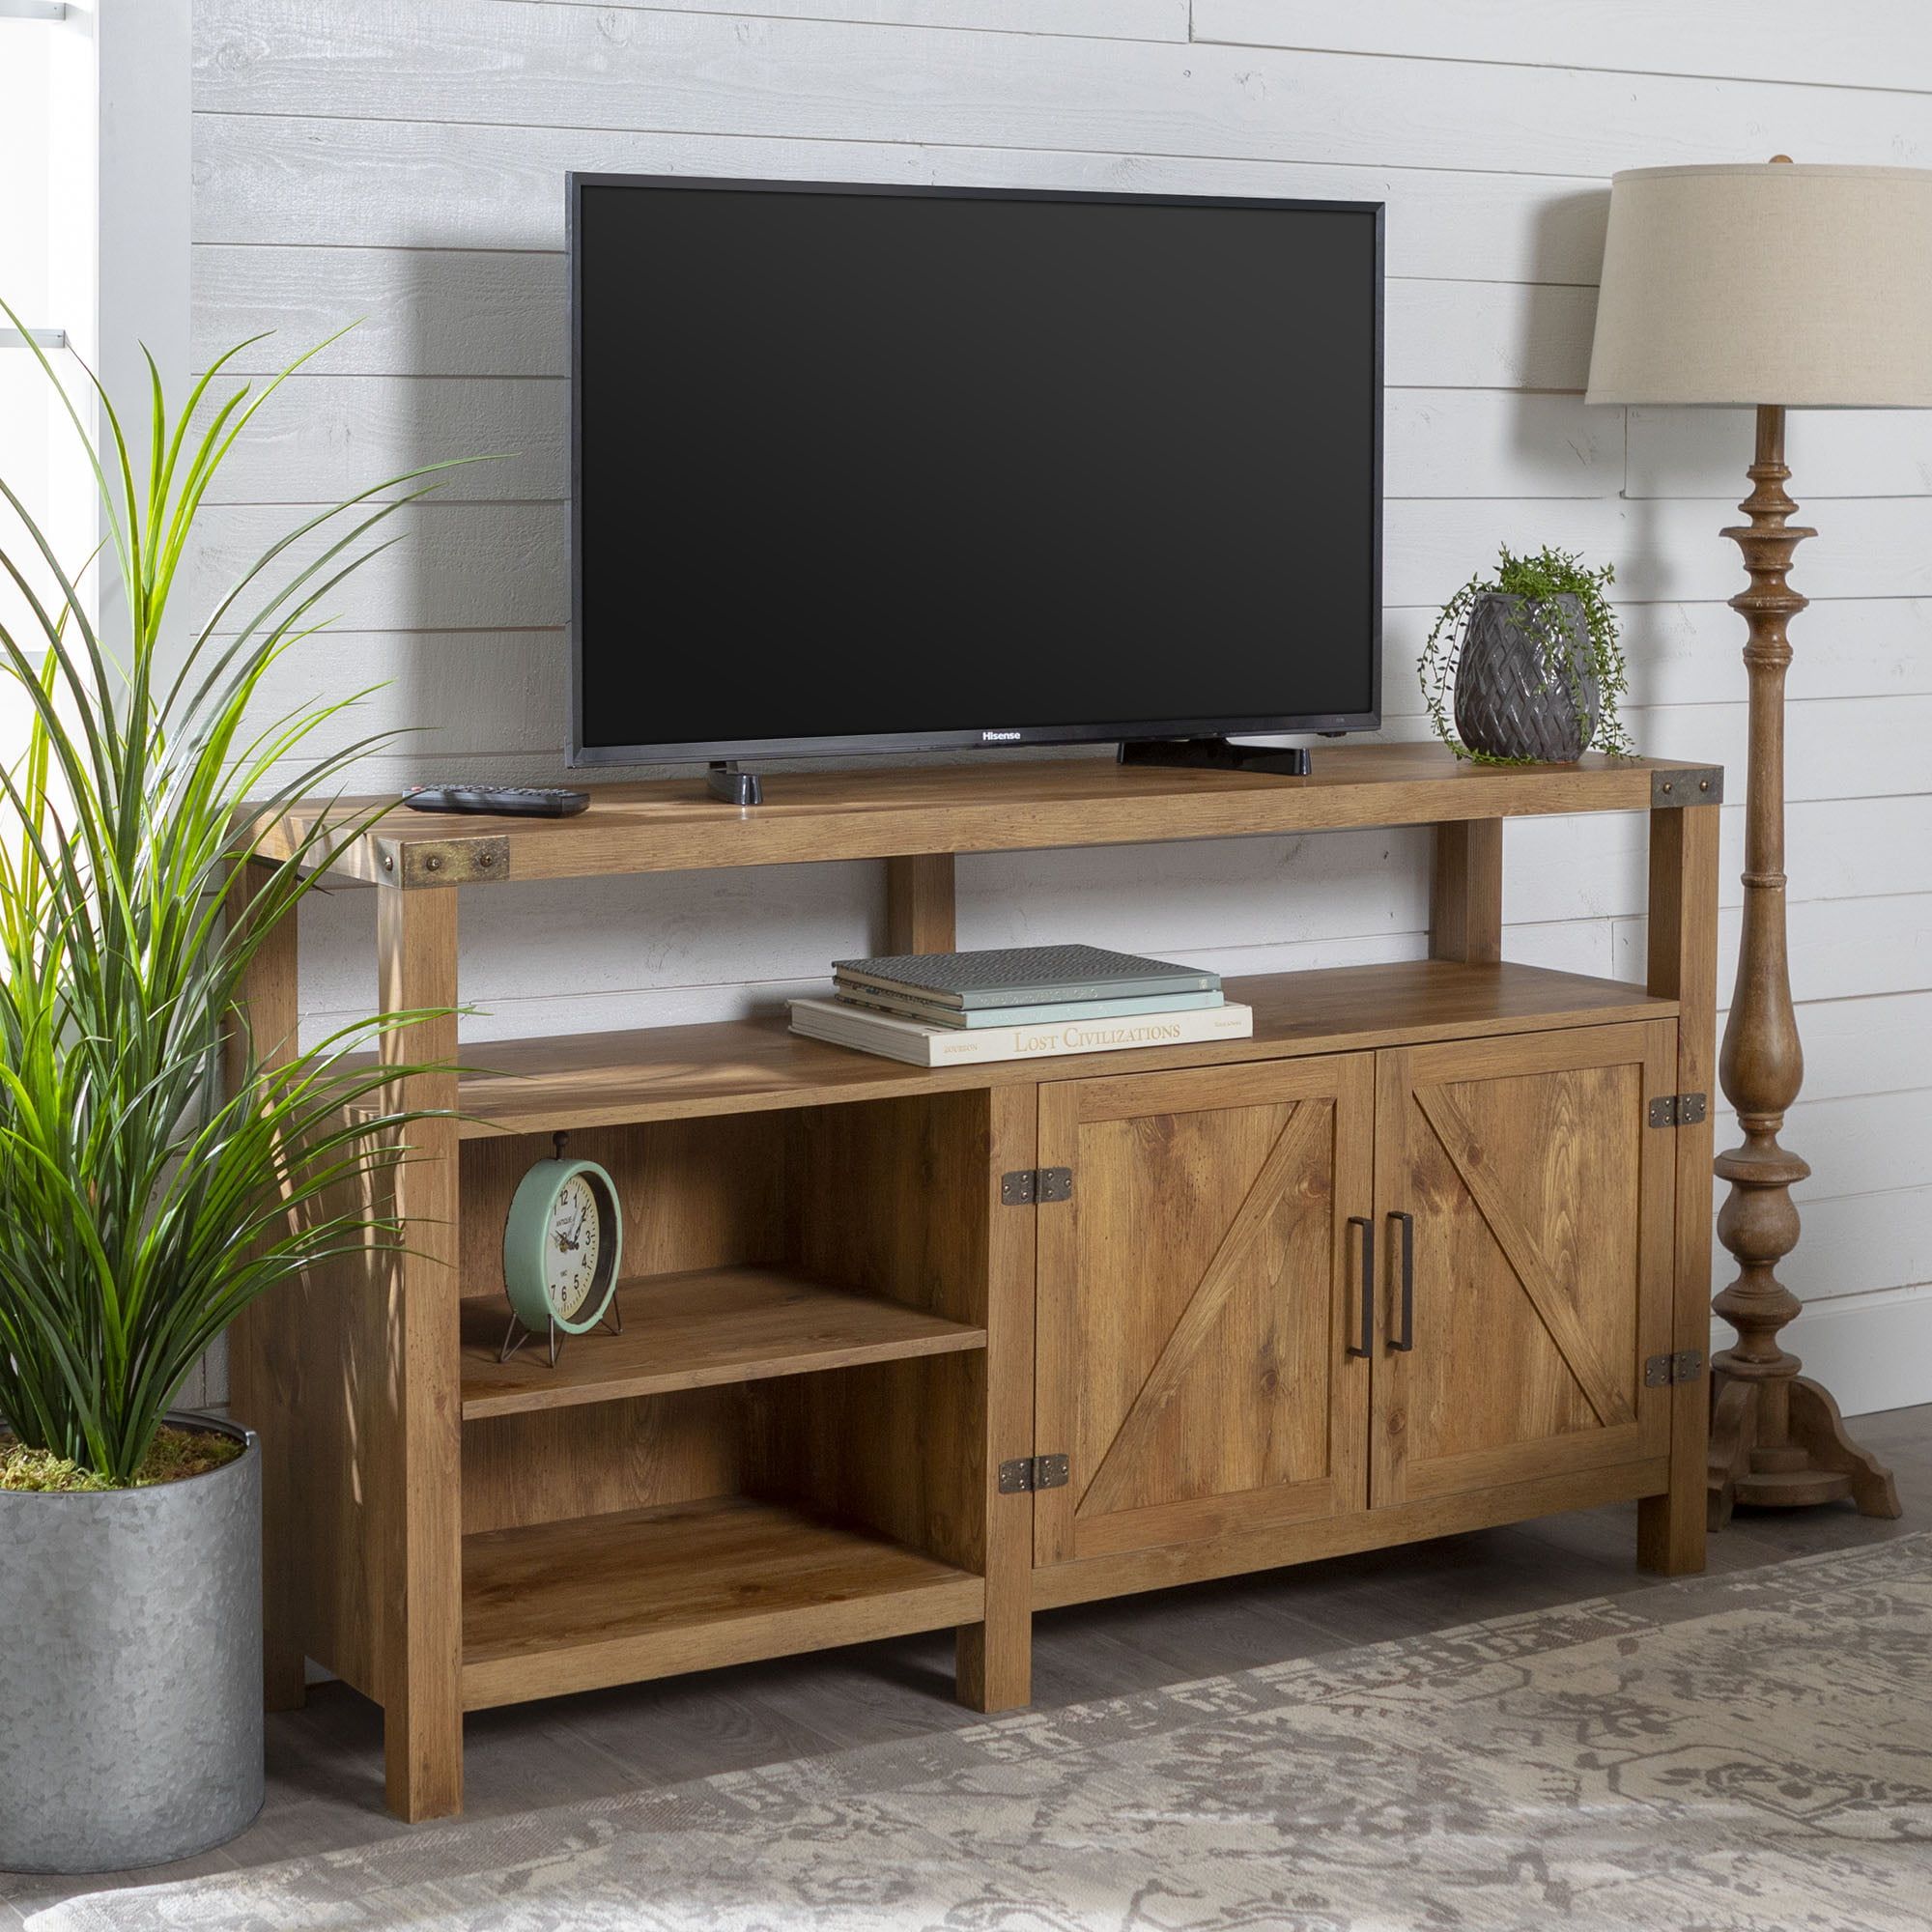 Woven Paths Modern Farmhouse Highboy Tv Stand For Tvs Up To 65 Throughout Modern Farmhouse Barn Tv Stands (Gallery 6 of 20)